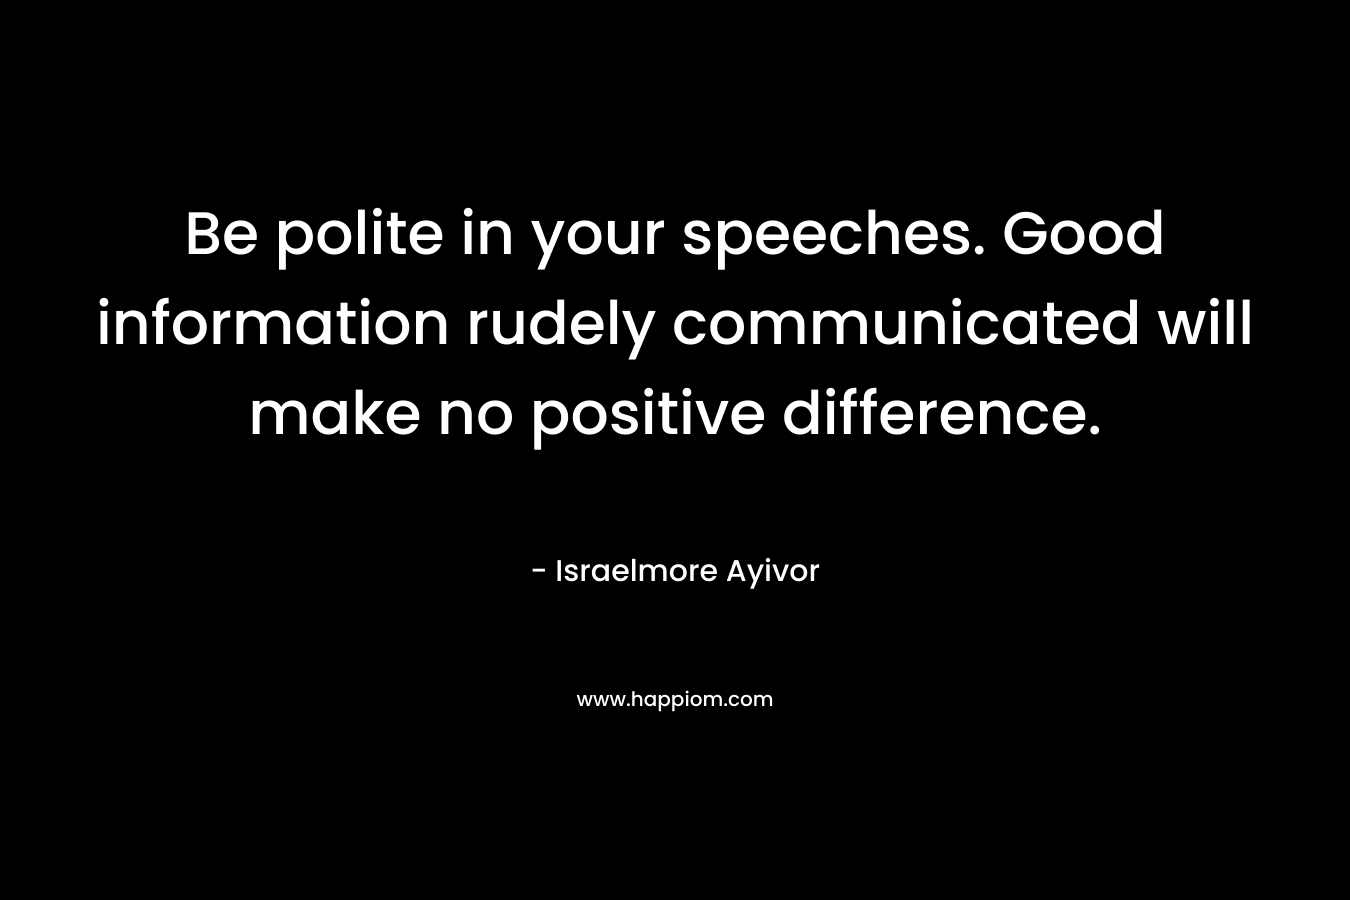 Be polite in your speeches. Good information rudely communicated will make no positive difference. – Israelmore Ayivor